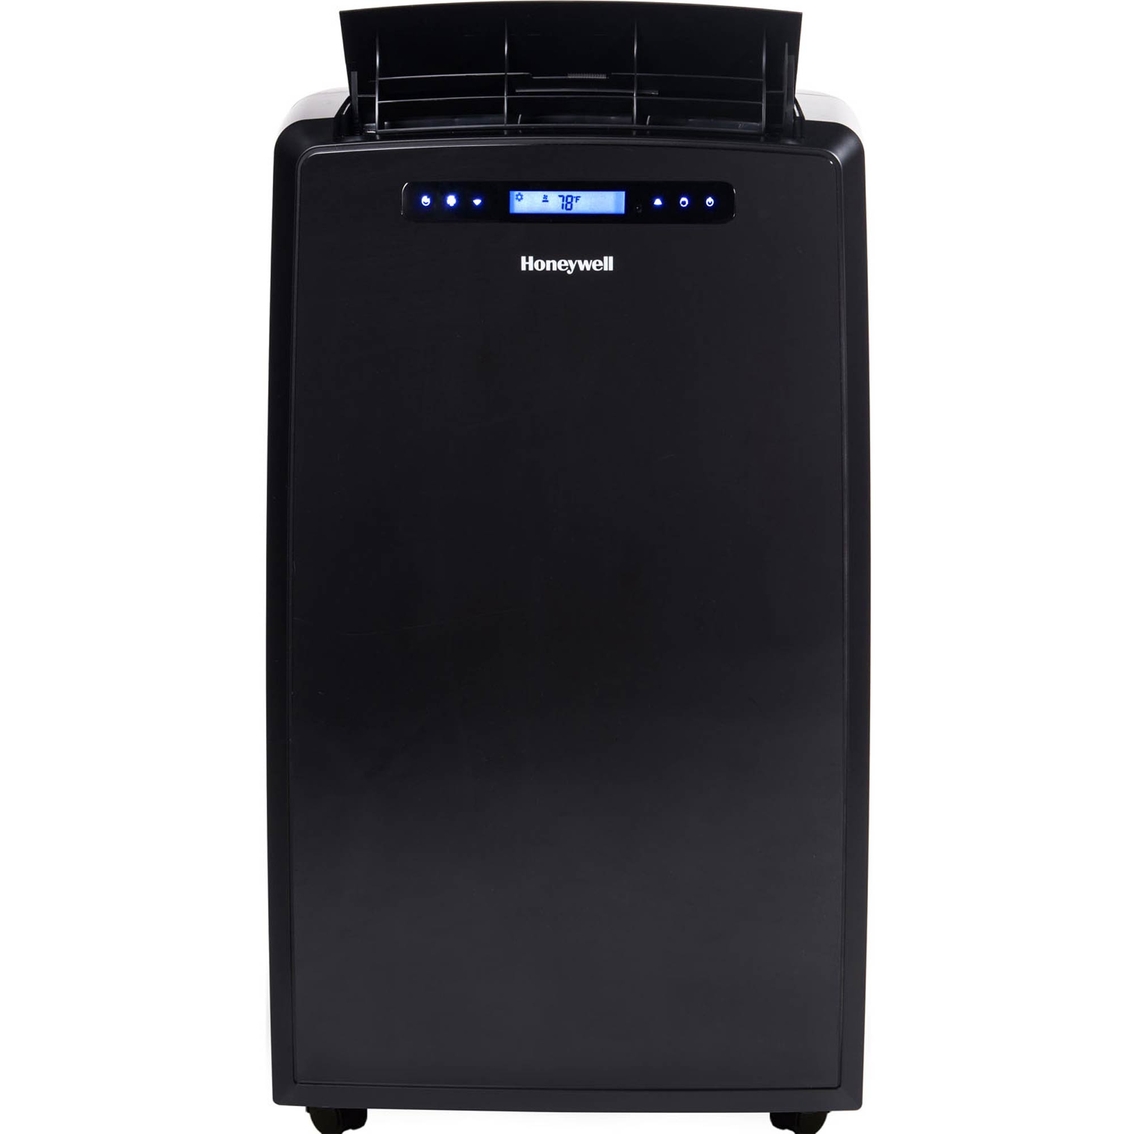 Honeywell 14,000 BTU Portable Air Conditioner with Remote Control, Black/Silver - Image 3 of 4